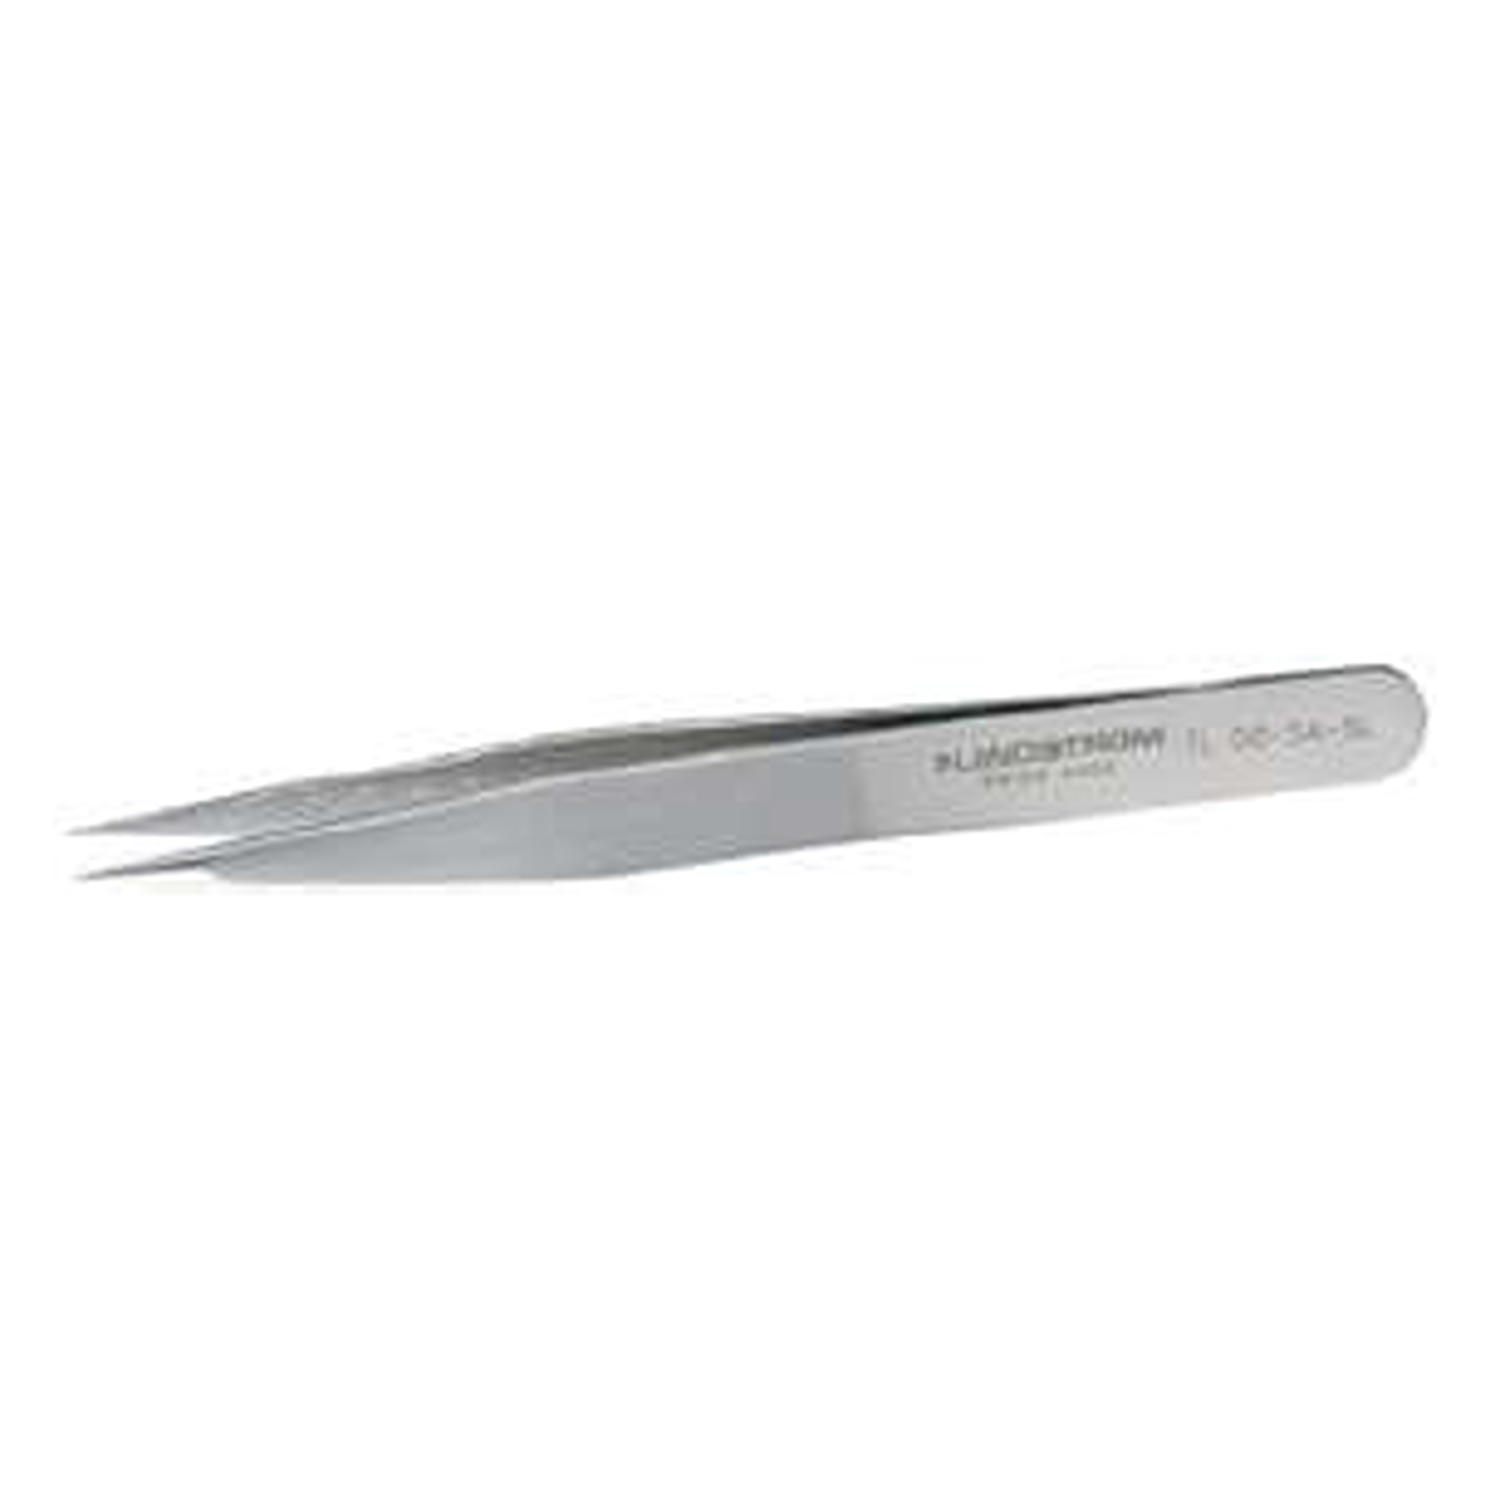 BAHCO TL 00-SA-SL Stainless Steel Precision Industrial Tweezers - Premium Tweezers from BAHCO - Shop now at Yew Aik.